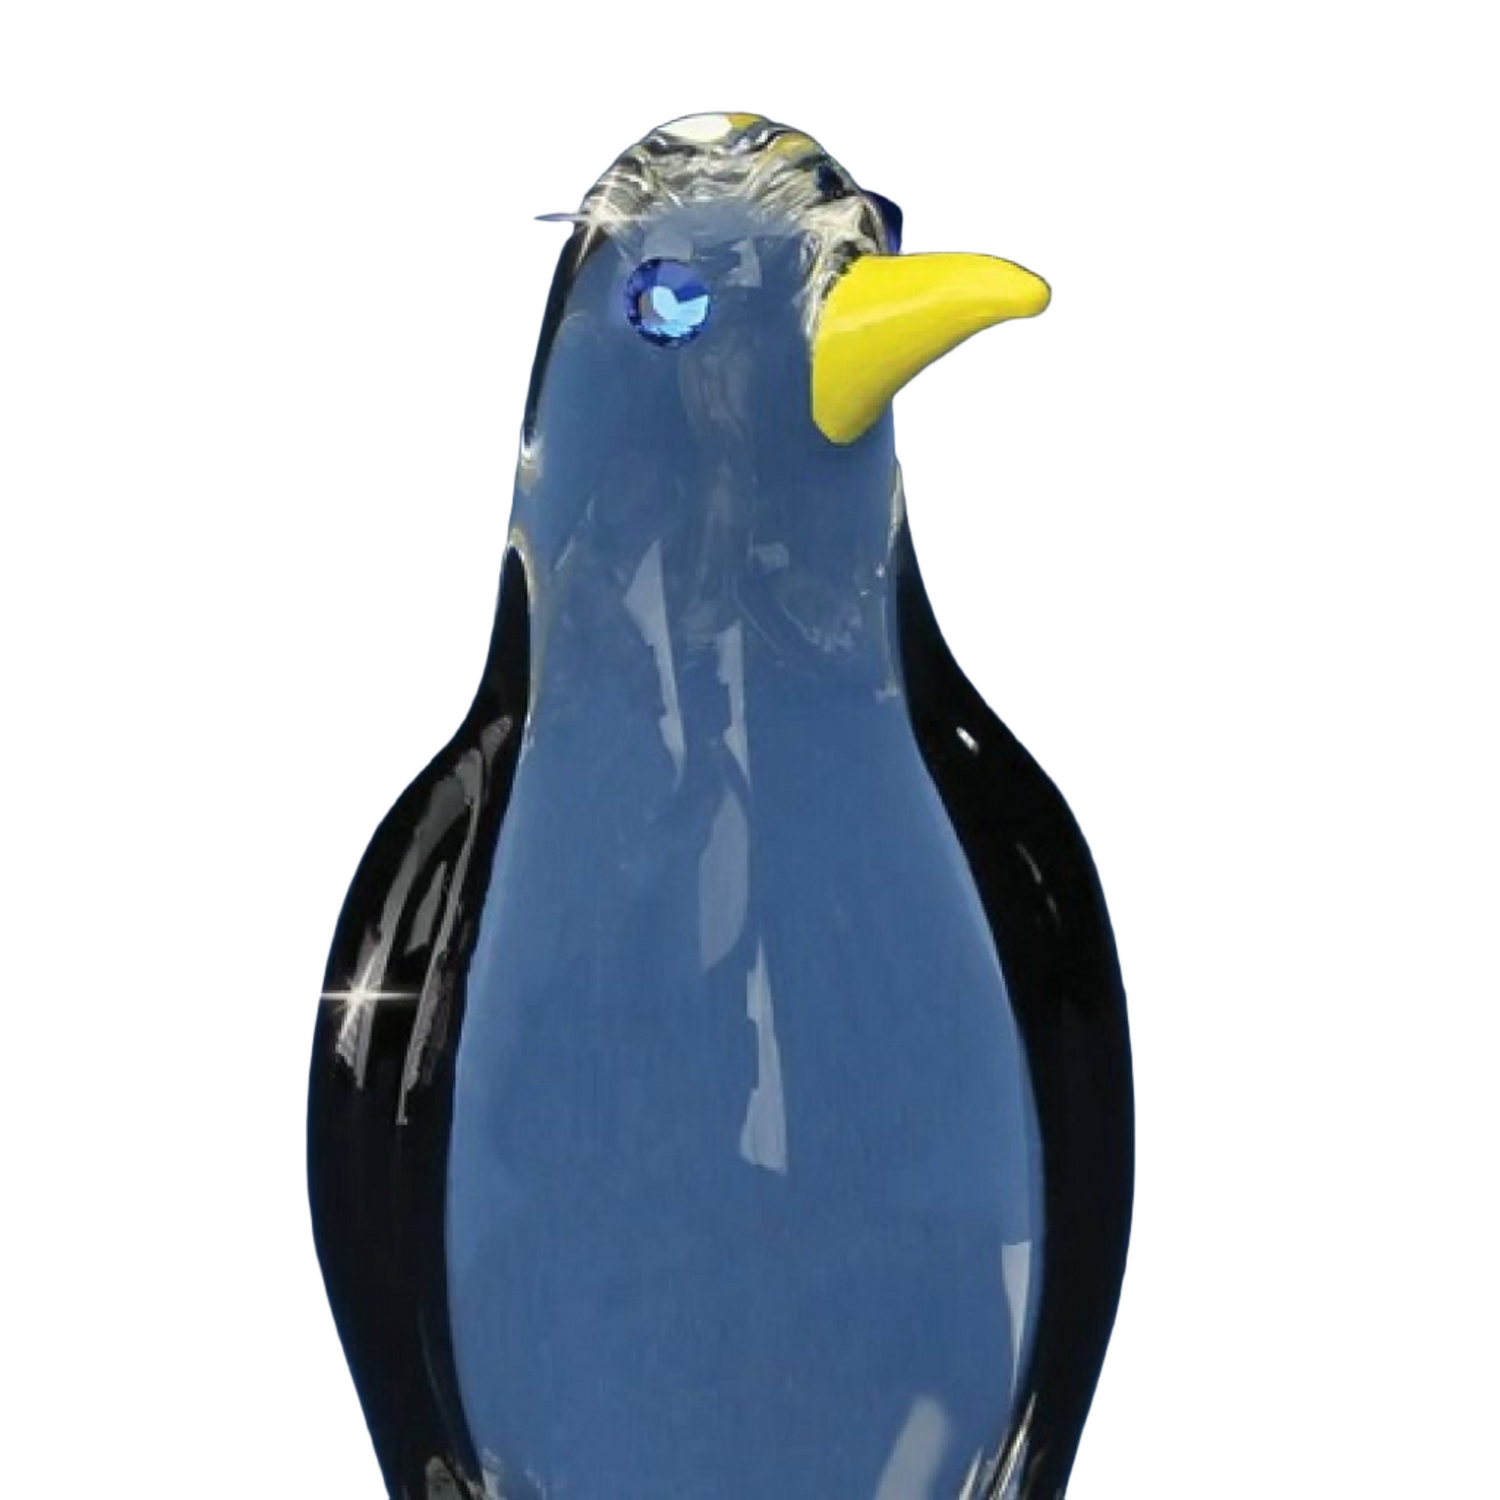 Glass Baron Chilly the Penguin Figurine